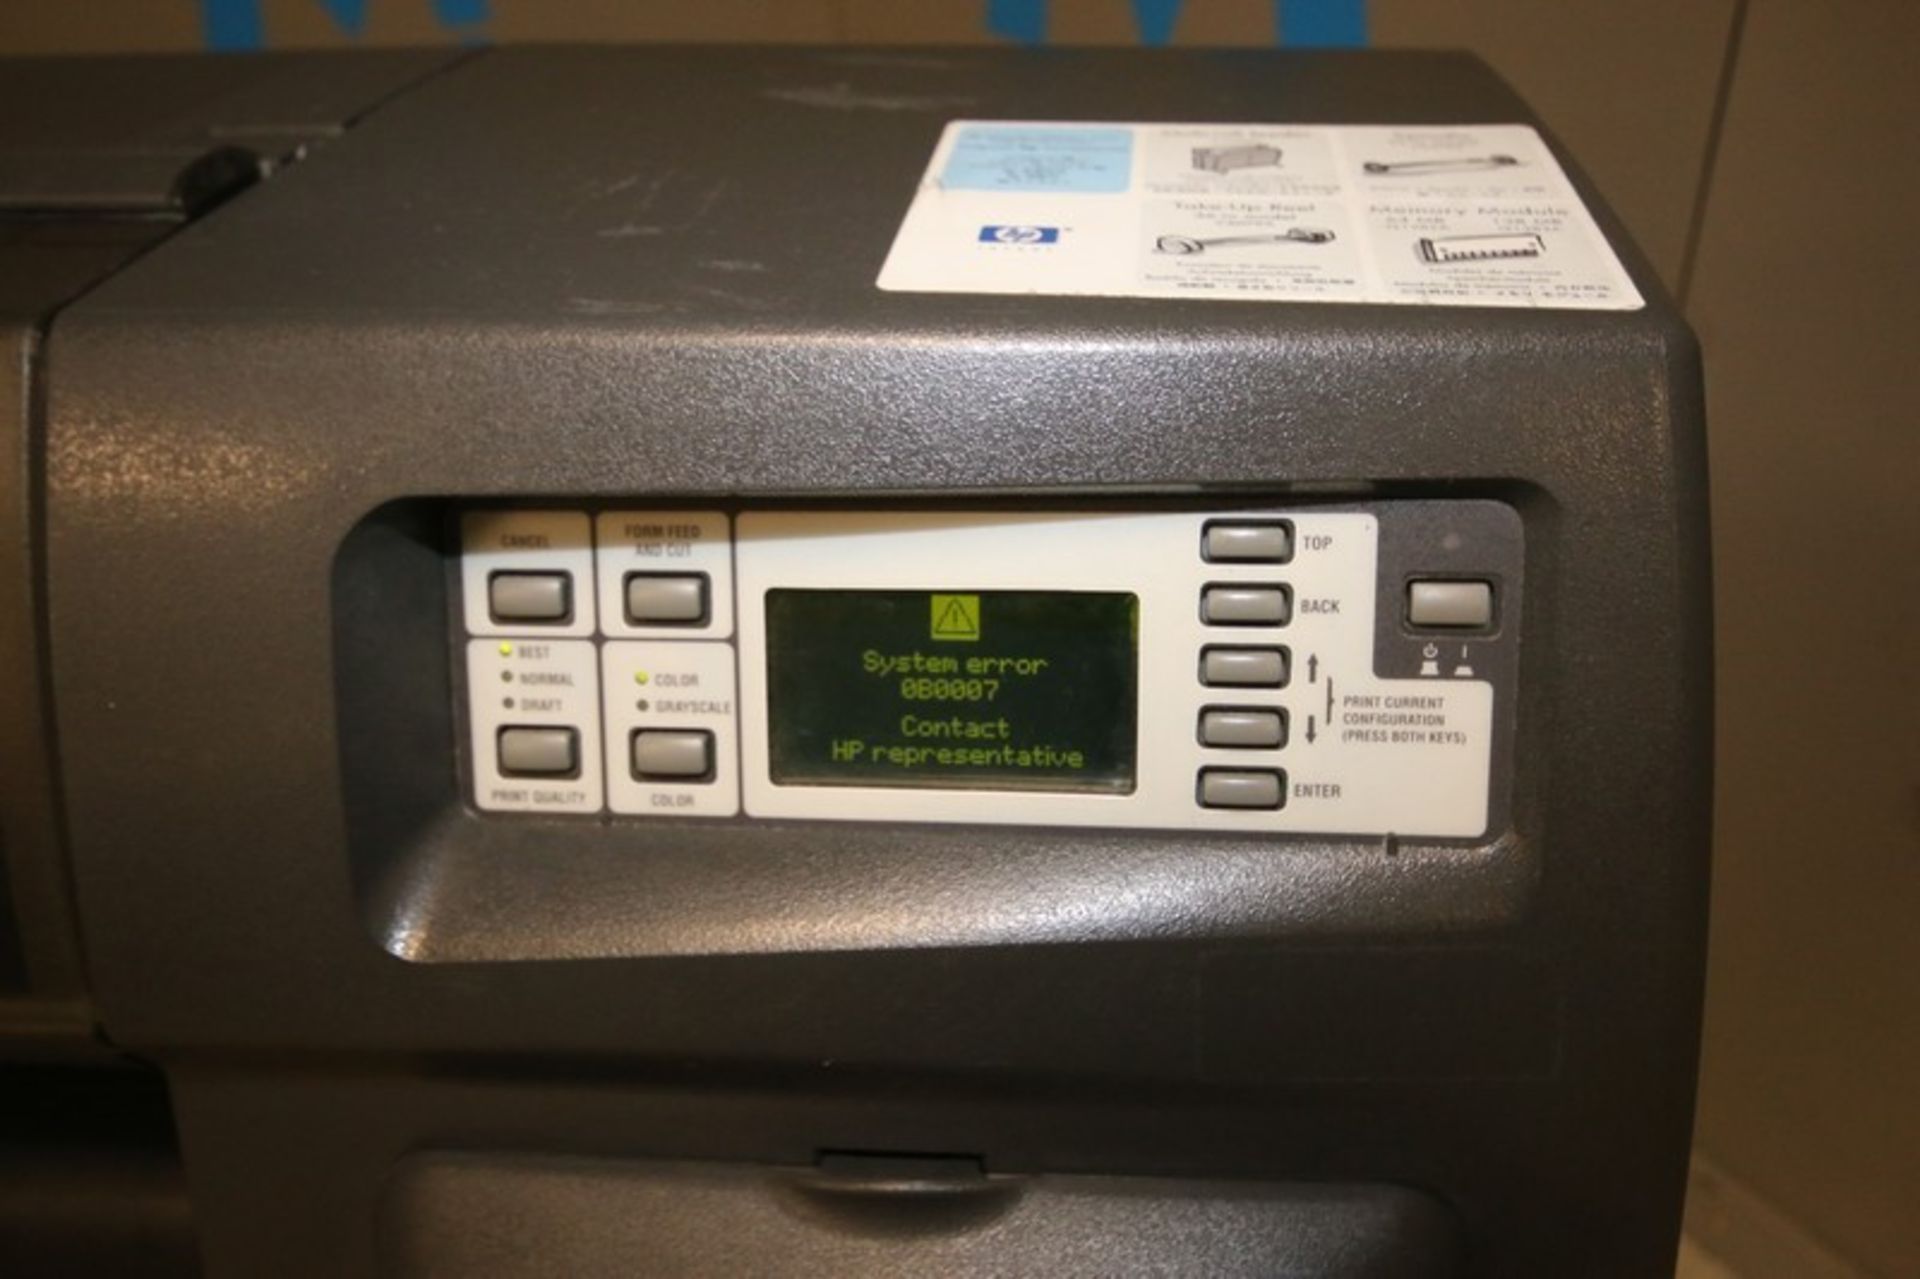 HP Designjet 1055CM Plus, Model C6075B, SN SG5472310F, (INV#69121)(Located at the MDG Auction - Image 2 of 3